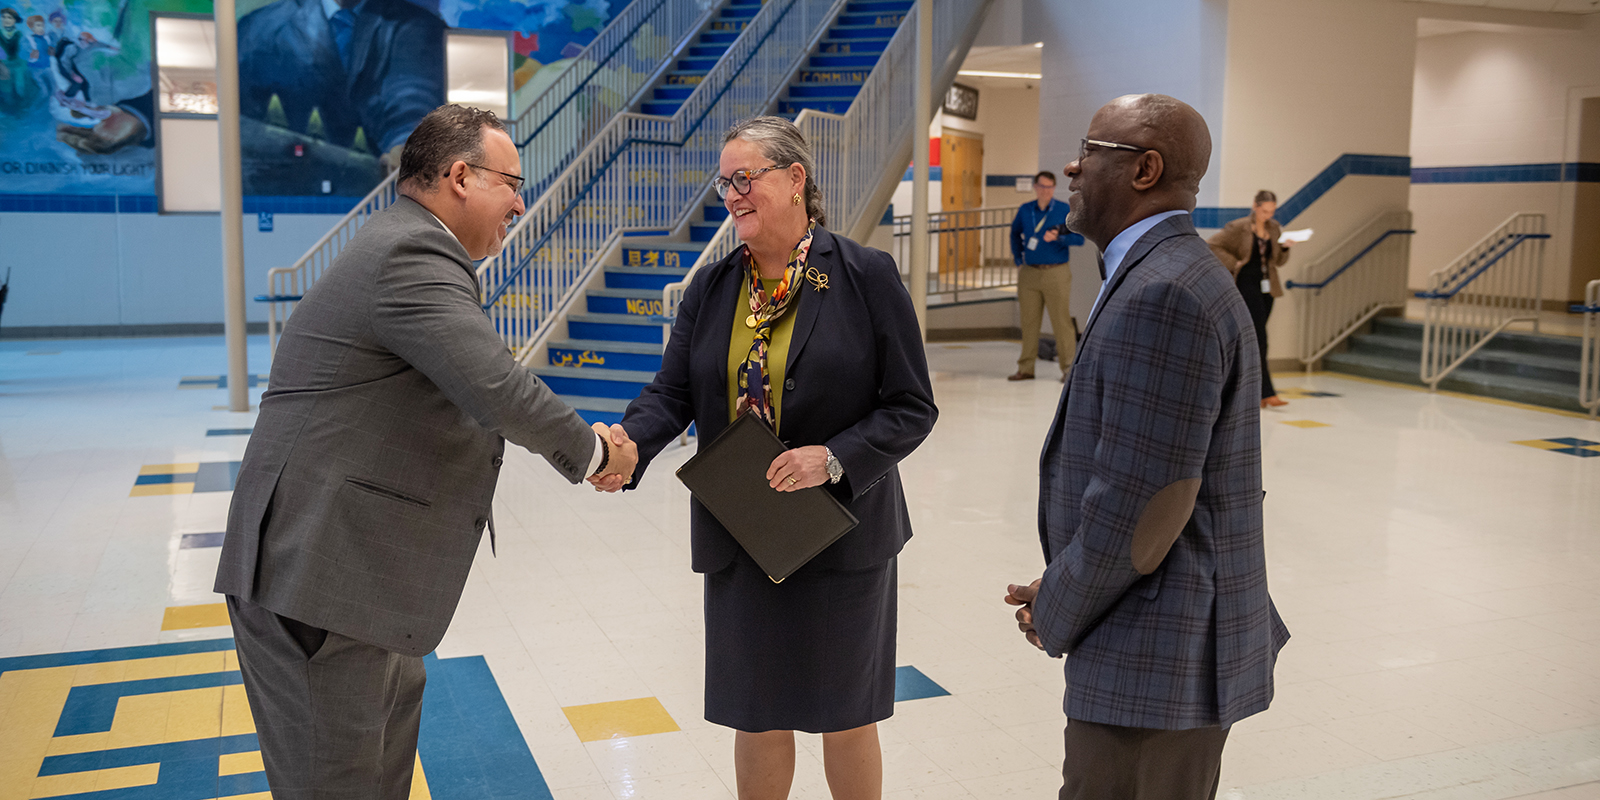 Lewis HS Principal Alfonso Smith and FCPS Superintendent Dr. Michelle Reid greet U.S. Education Sec. Miguel Cardona as he visits Lewis for a town hall on teen mental health.